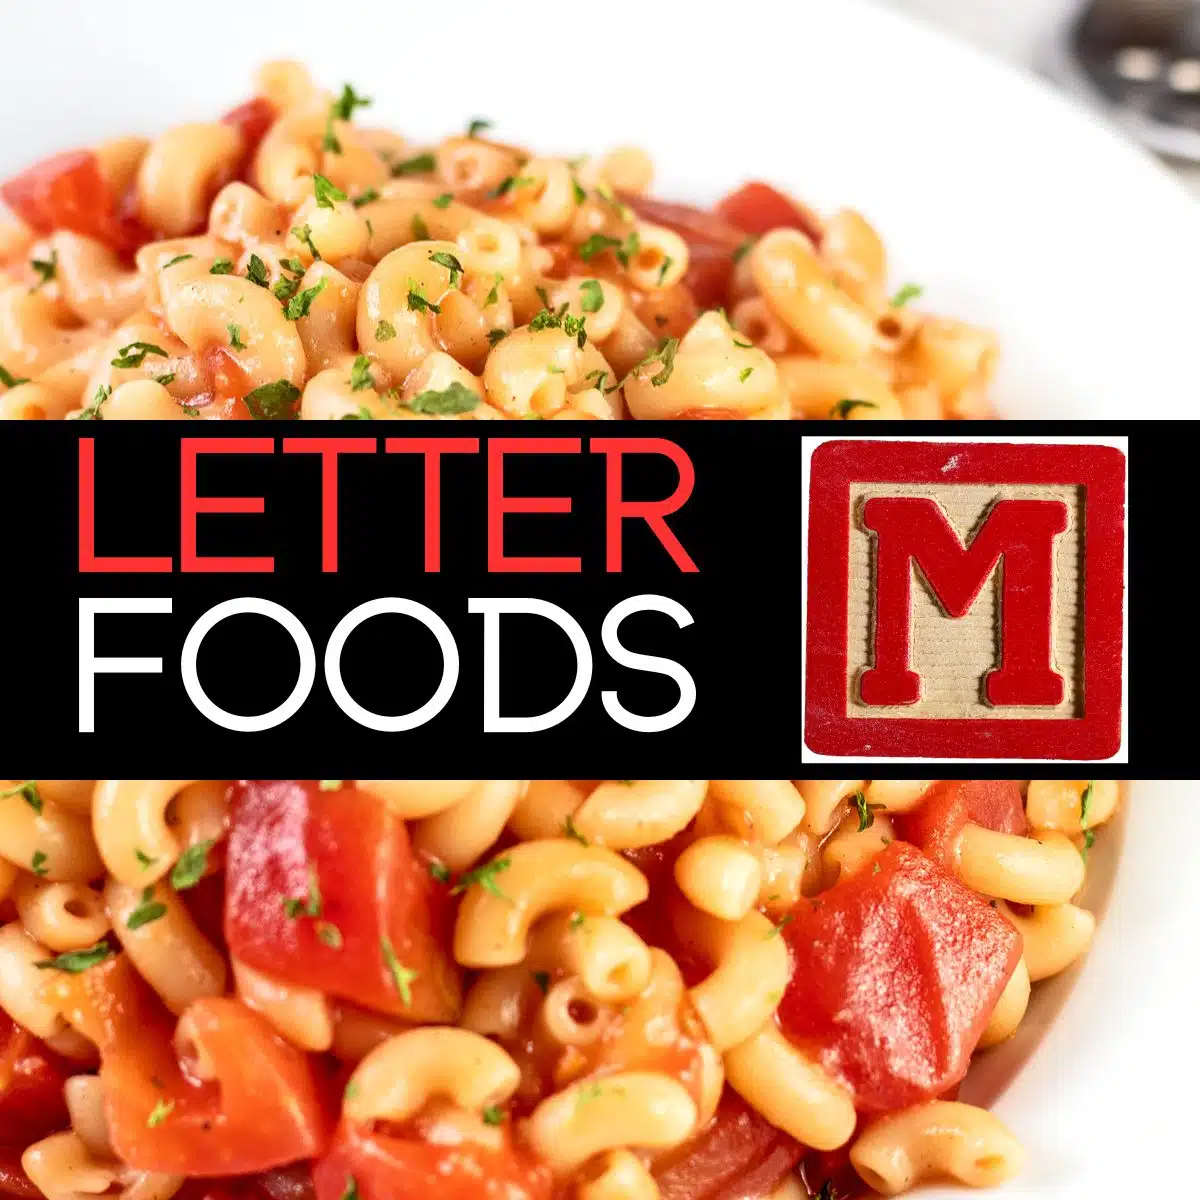 Square image for foods that start with the letter M, showing macaroni.